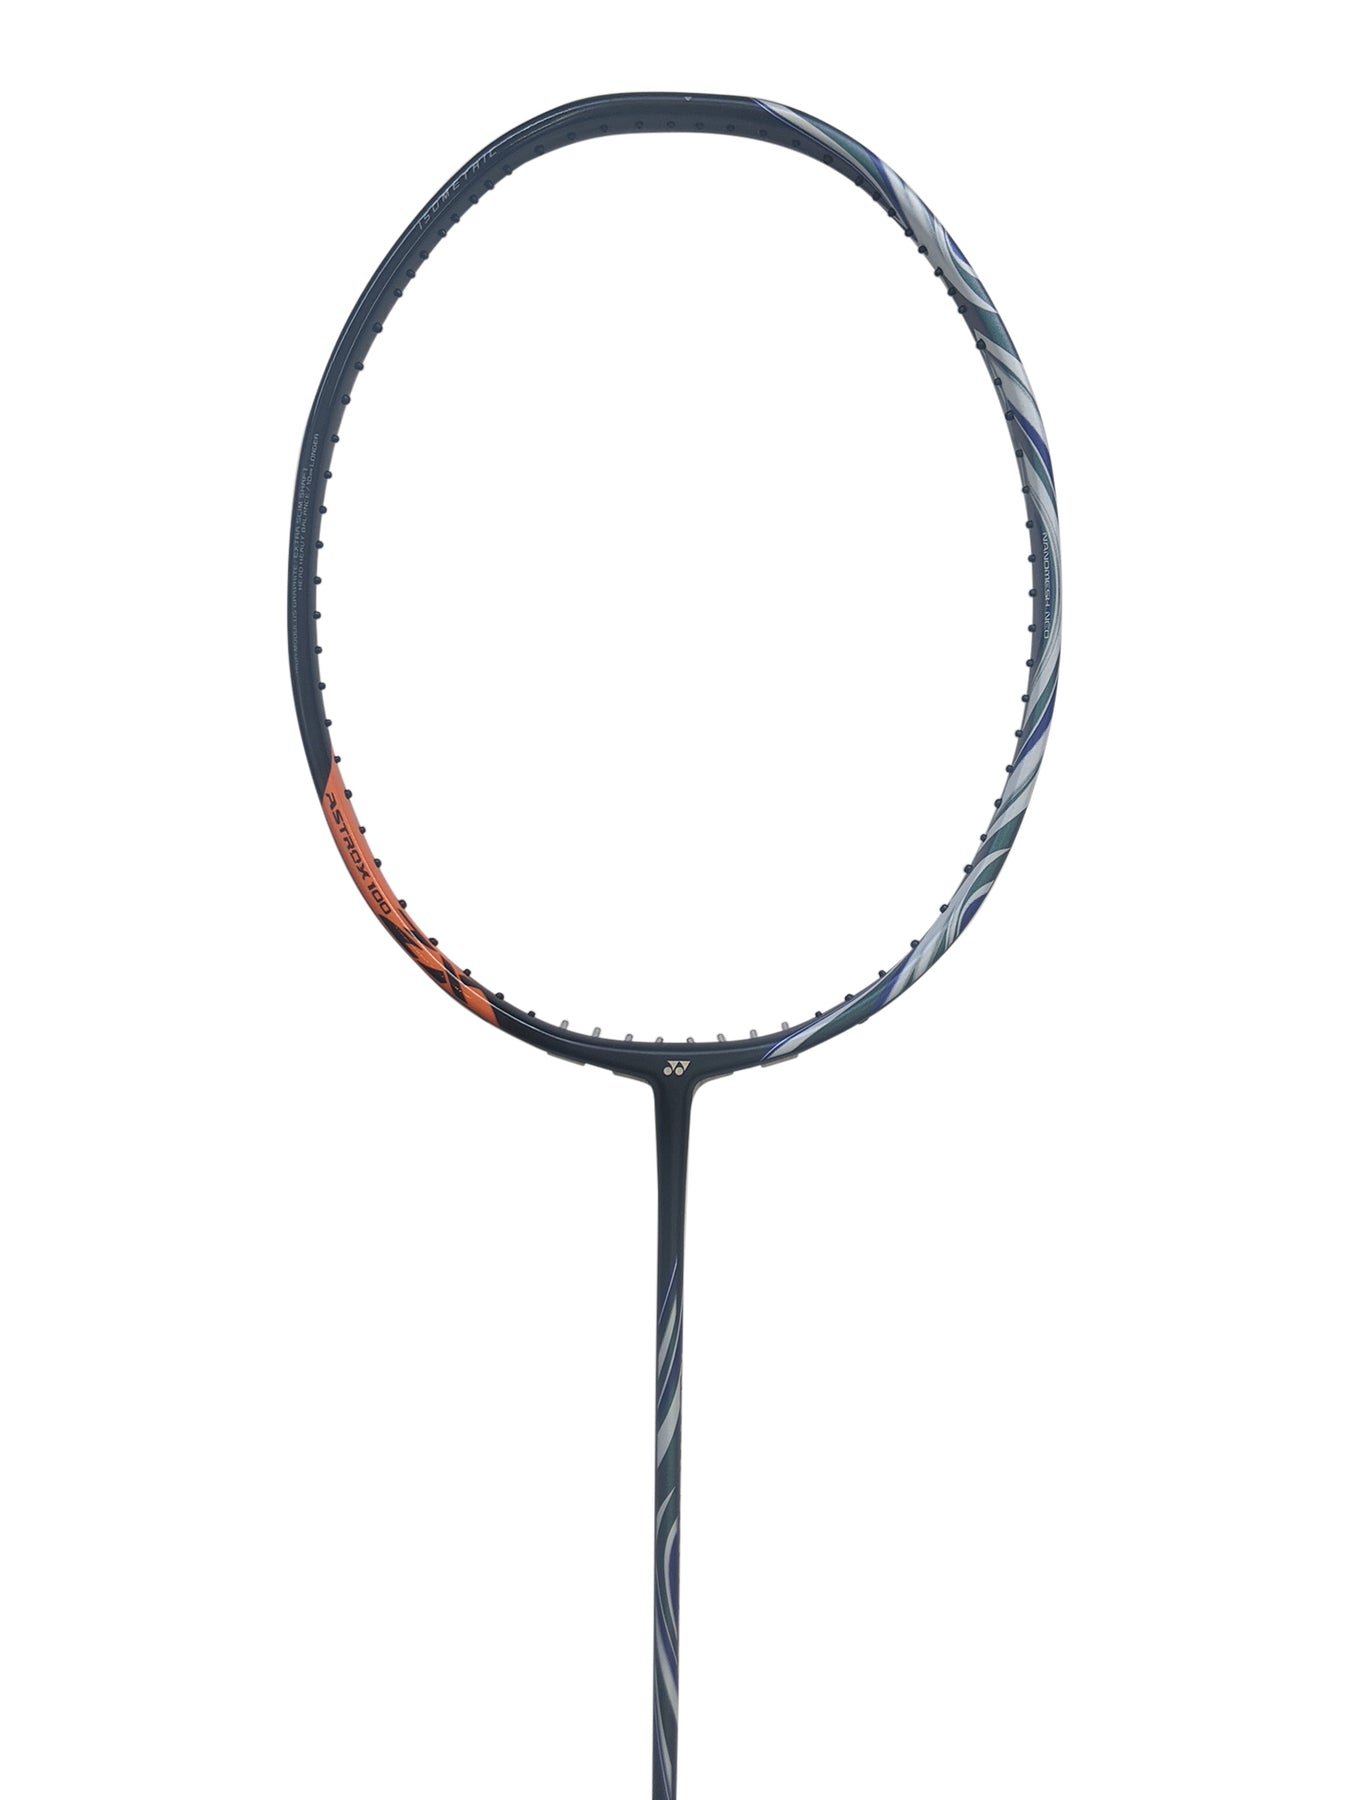 Advanced Badminton Rackets with free shipping